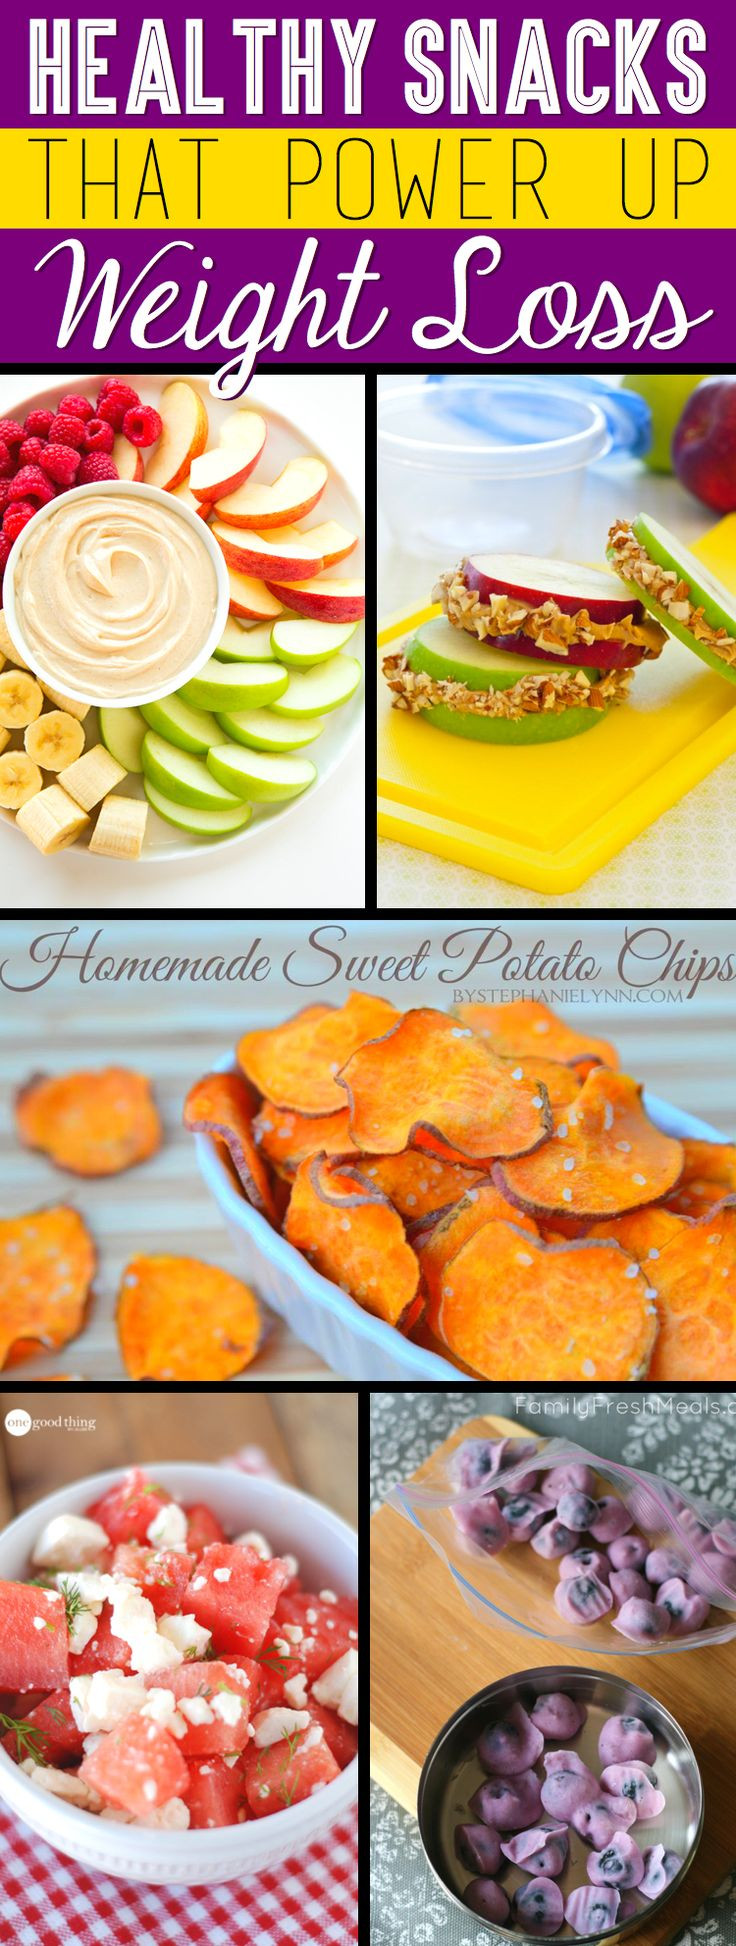 Healthy Low Calorie Snacks For Weight Loss
 Best 25 Weight loss snacks ideas on Pinterest